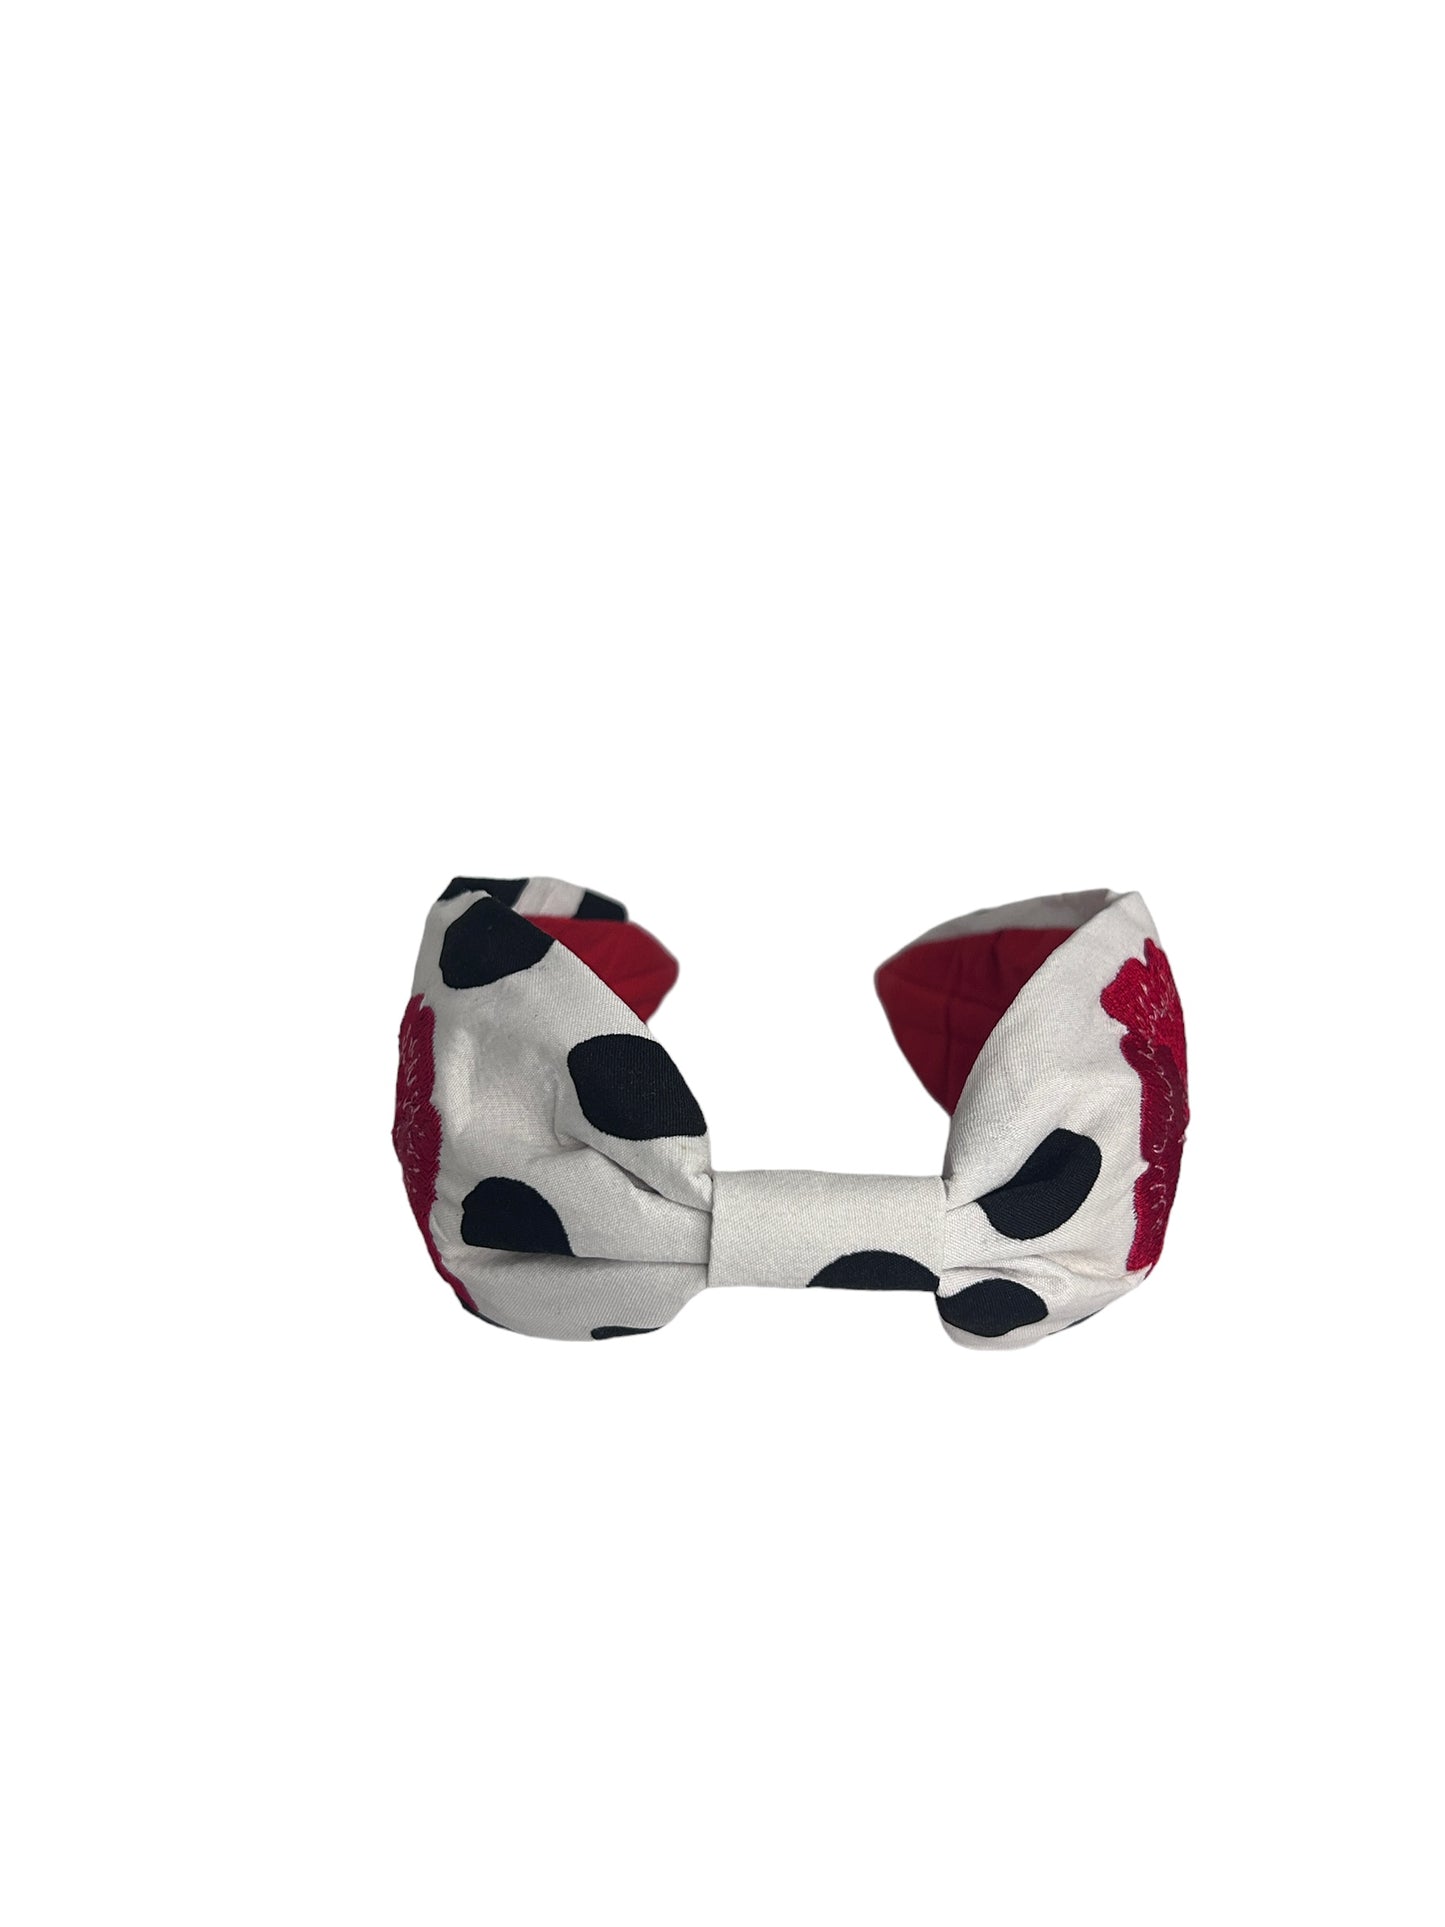 Headbands - Black and White Polka Dots with Embroidered Flowers